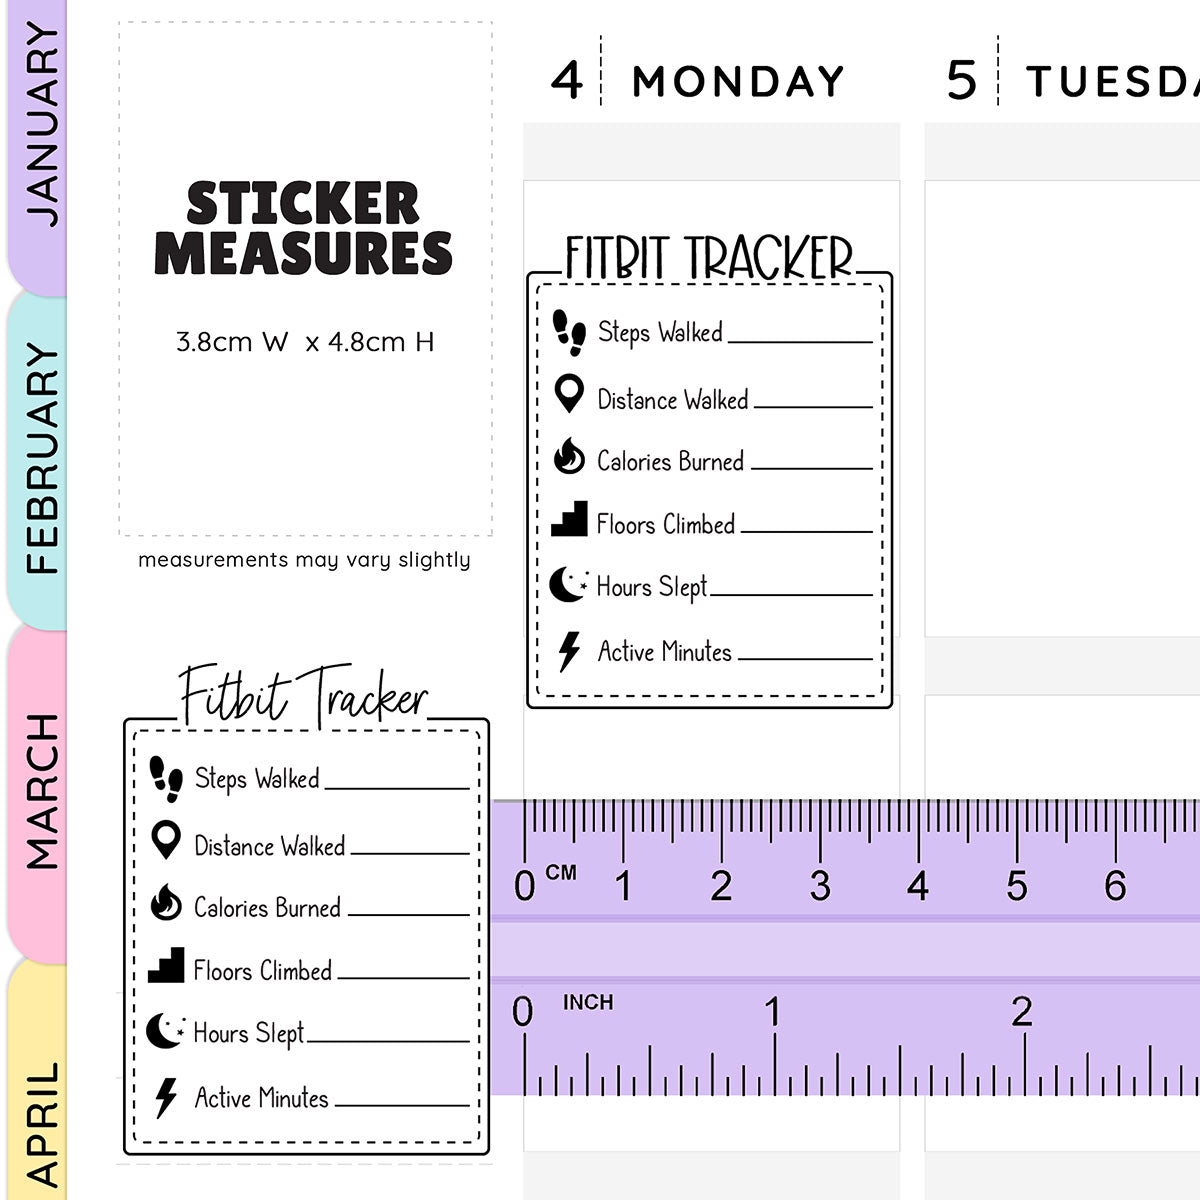 Weekly Fitbit Tracker Stickers